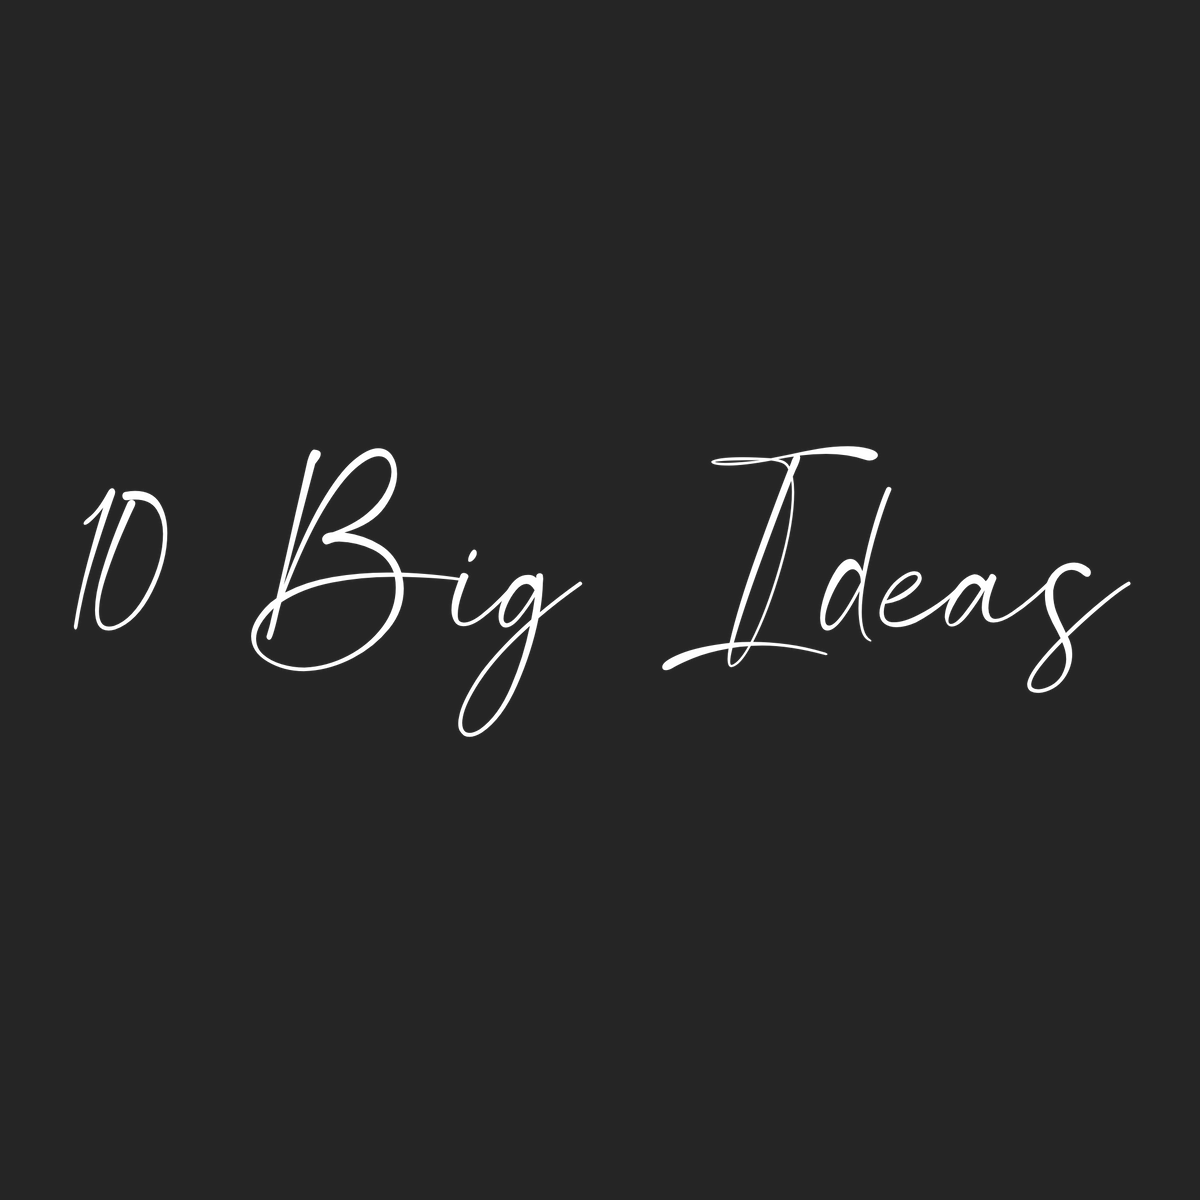 Ideas that shaped me